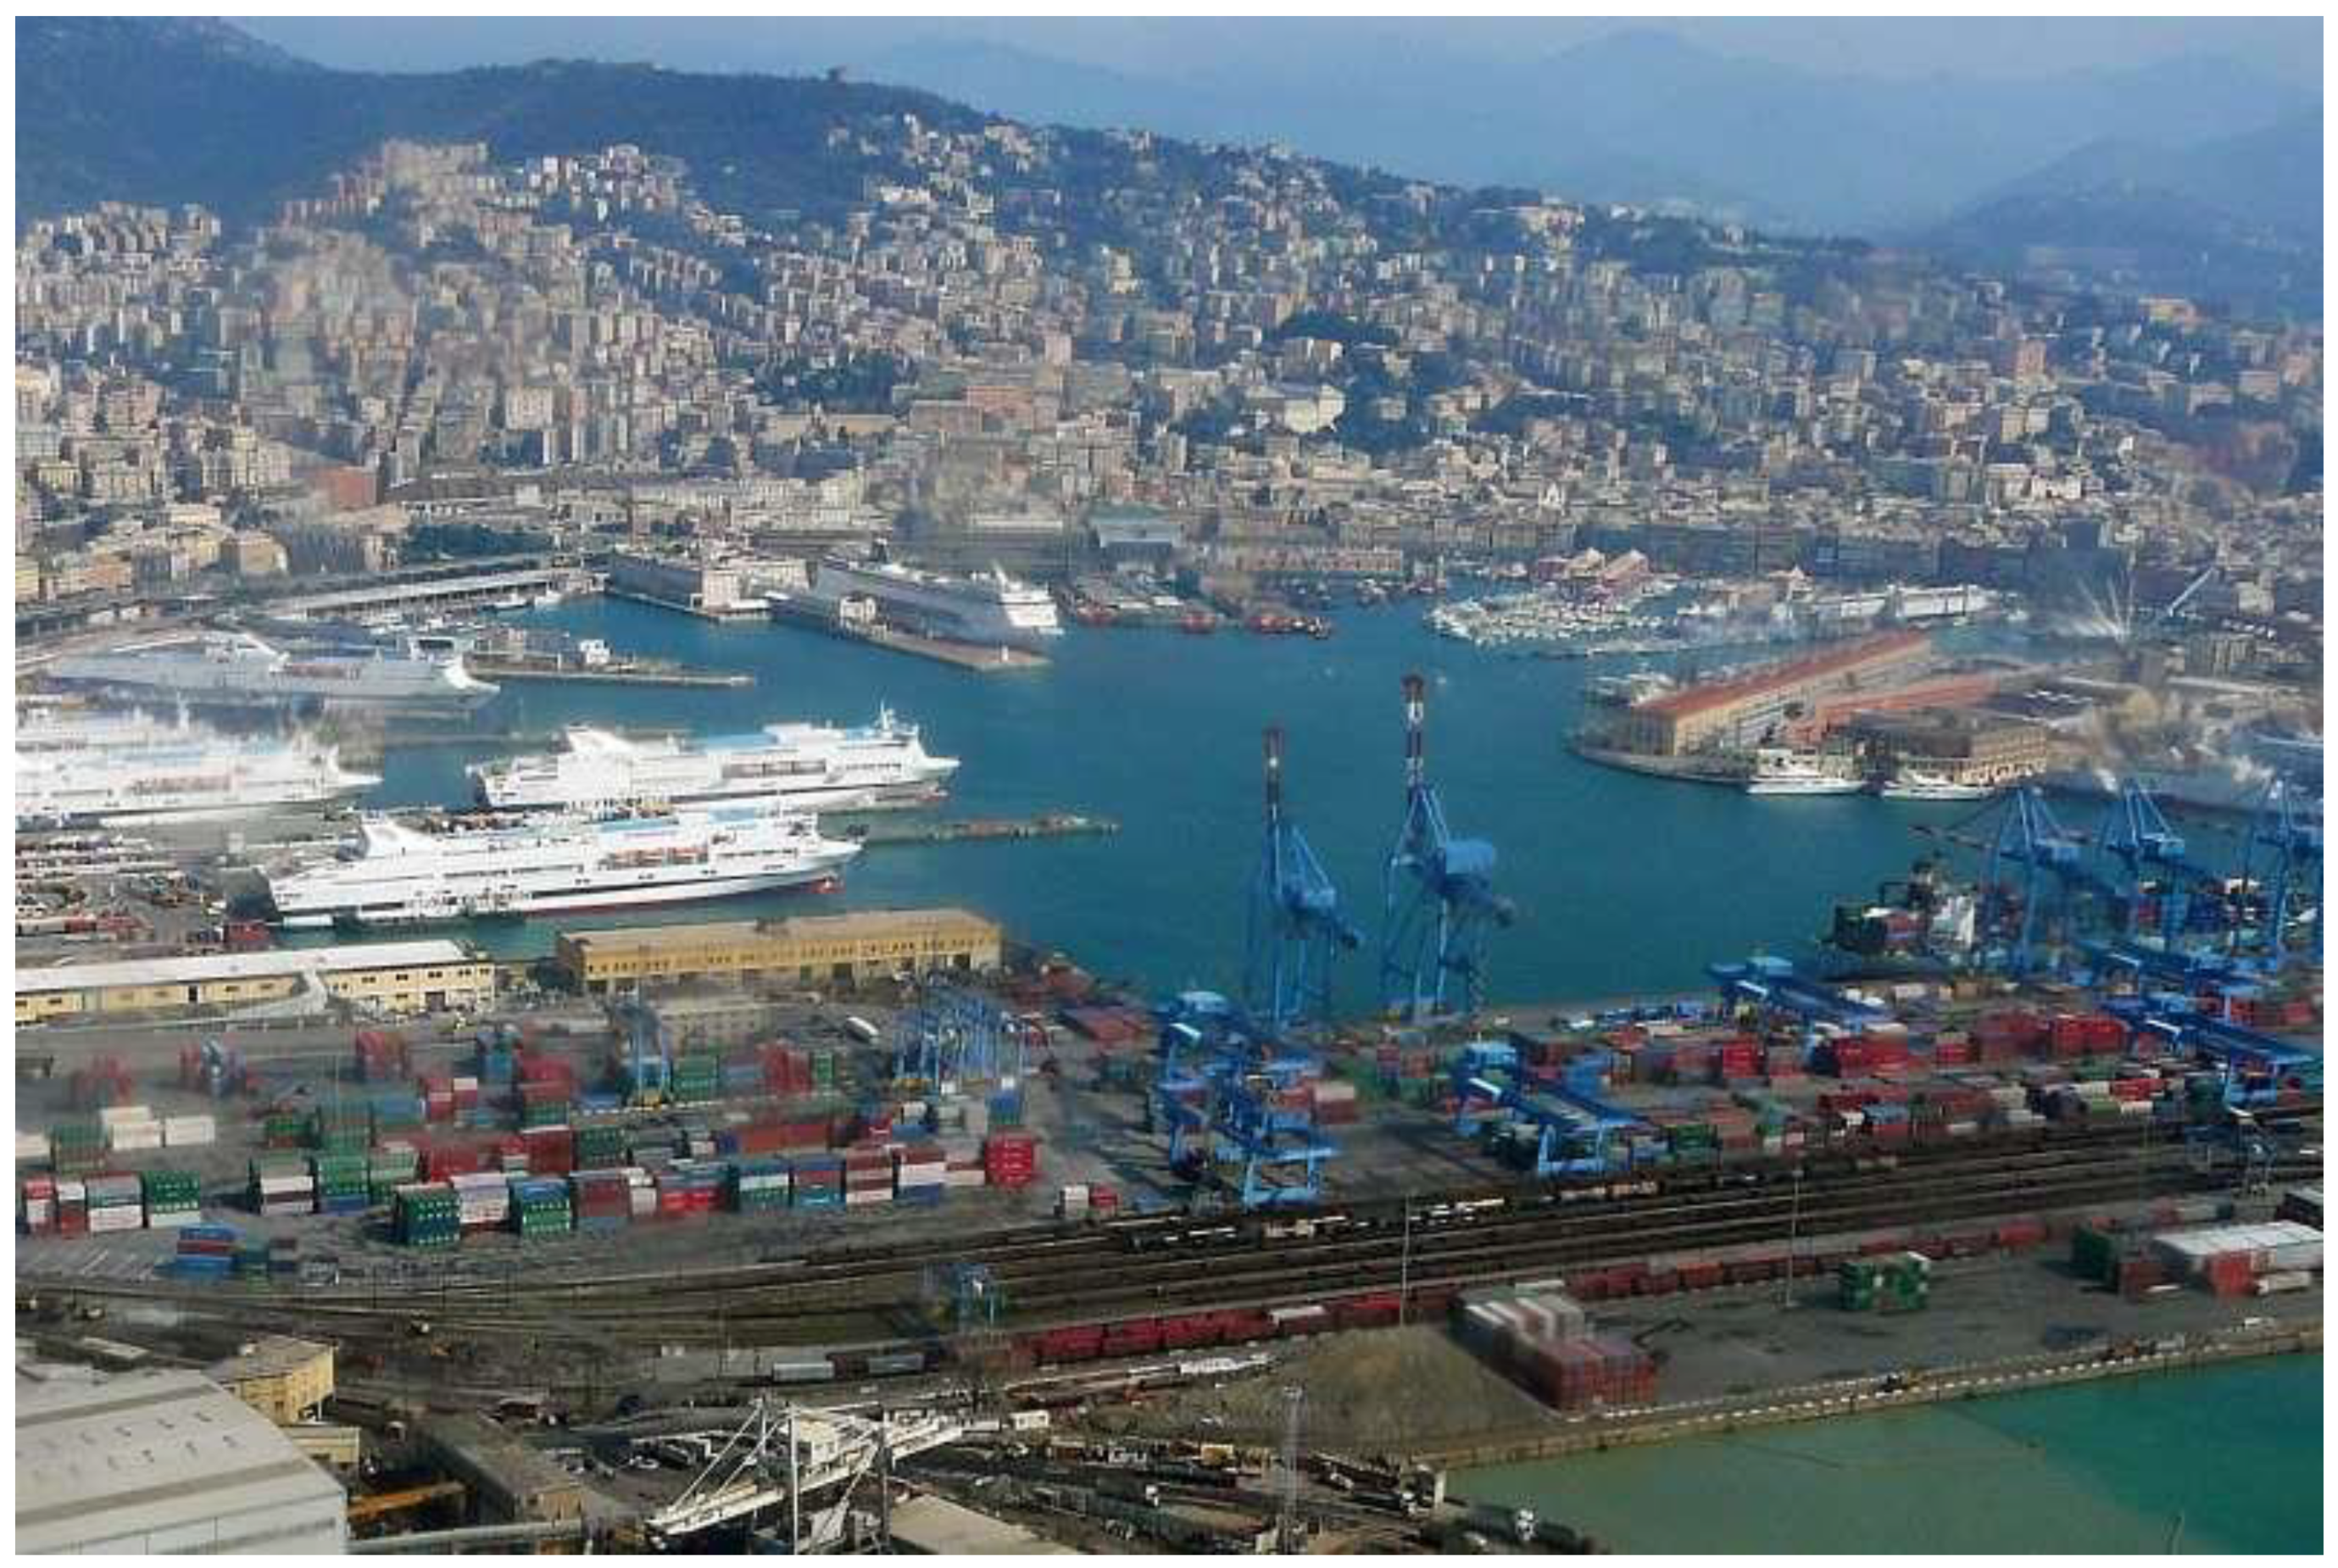 Applied Sciences Free Full Text Black Carbon And Other Air Pollutants In Italian Ports And Coastal Areas Problems Solutions And Implications For Policies Html